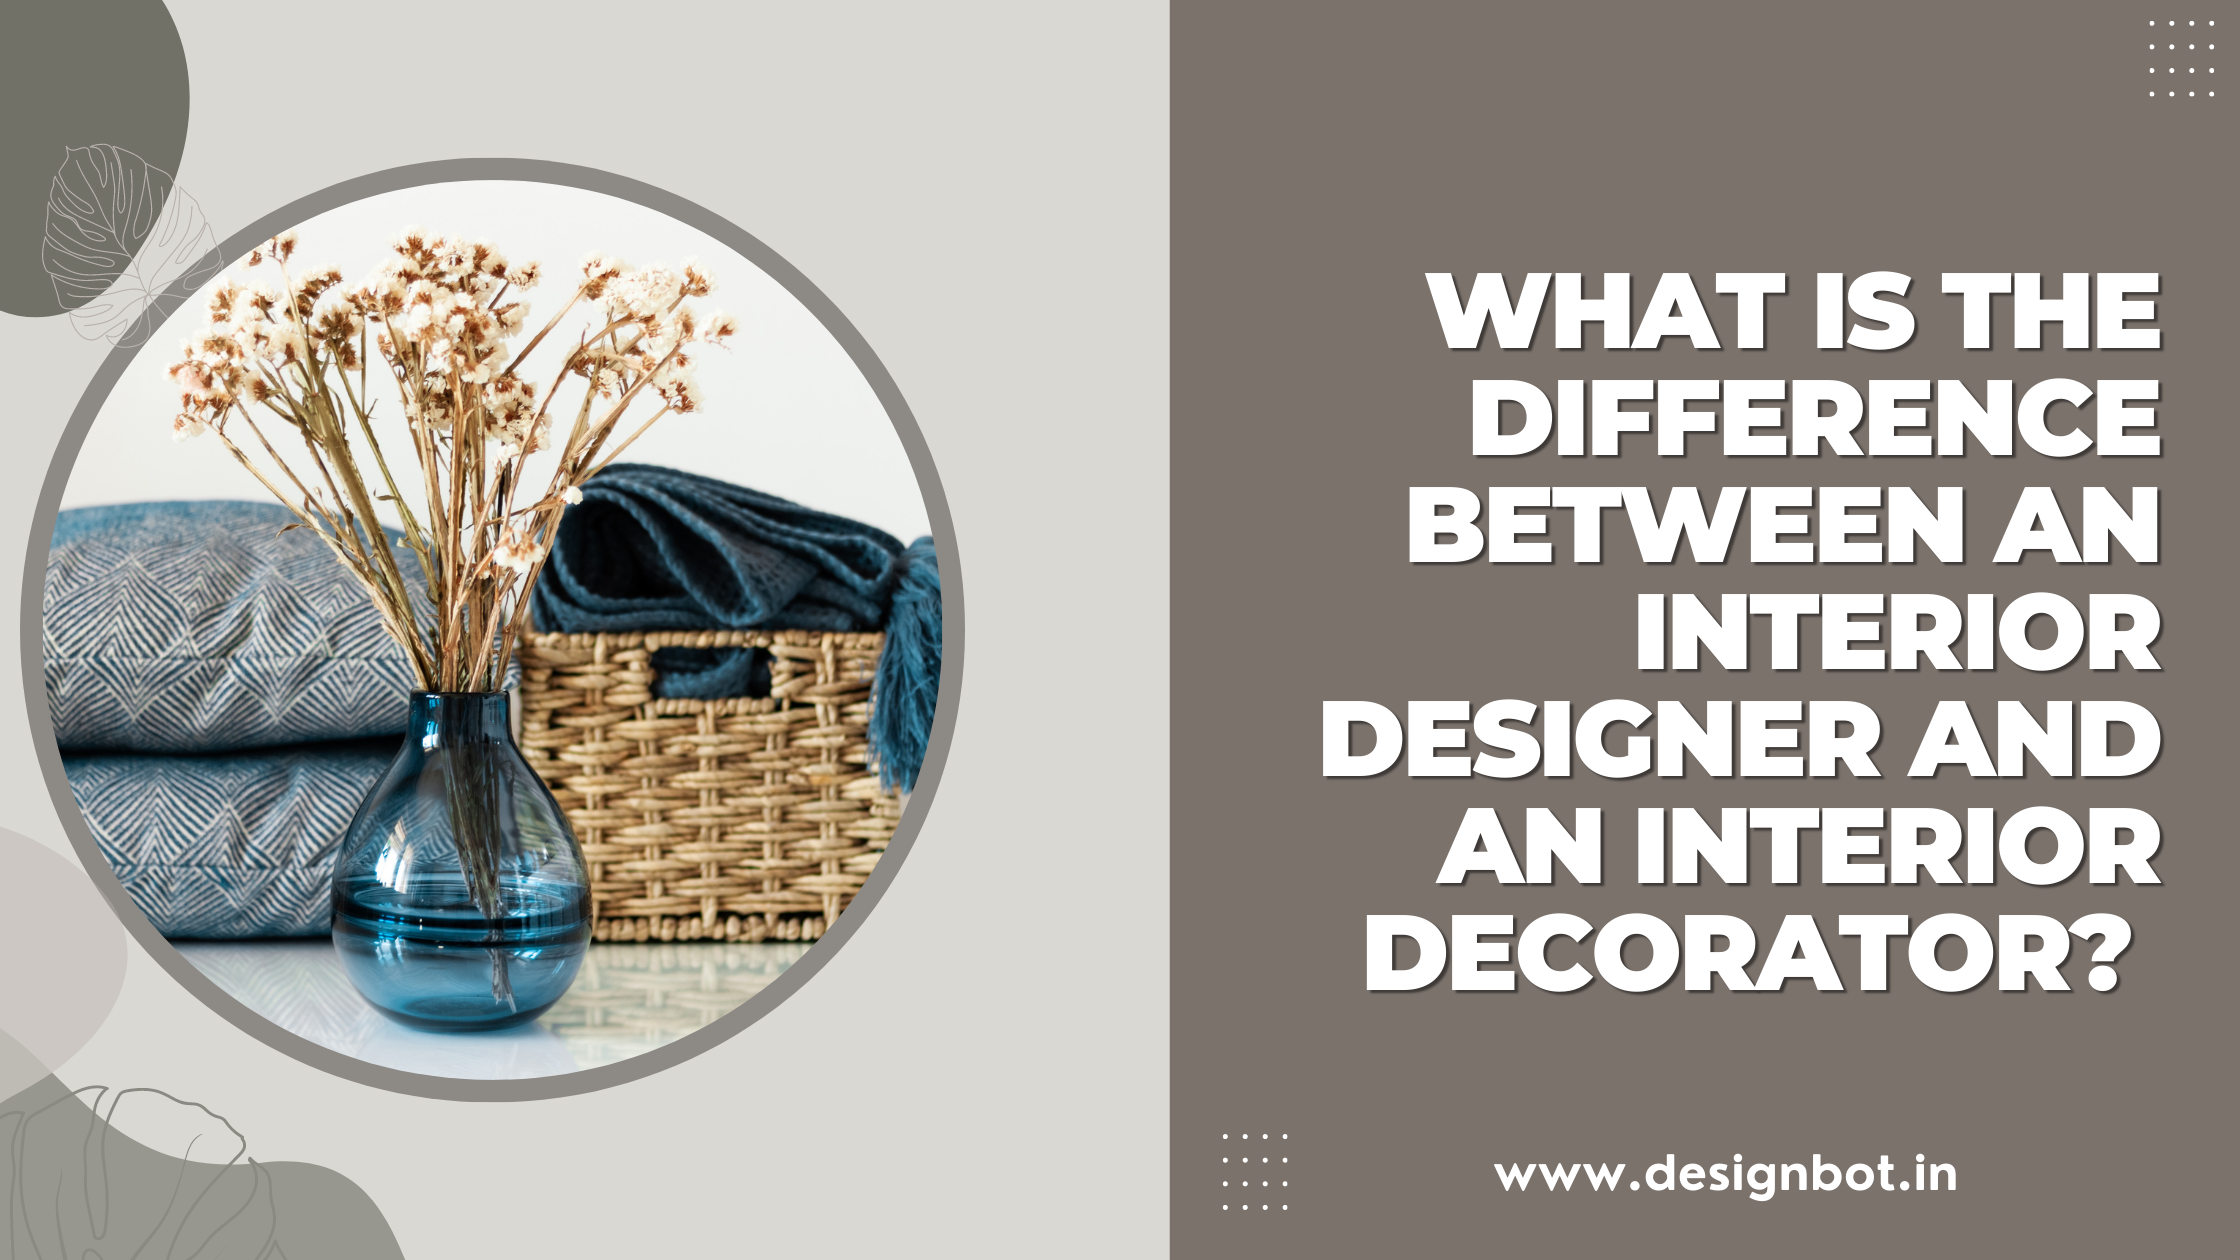 What is the difference between an interior designer and an interior decorator?